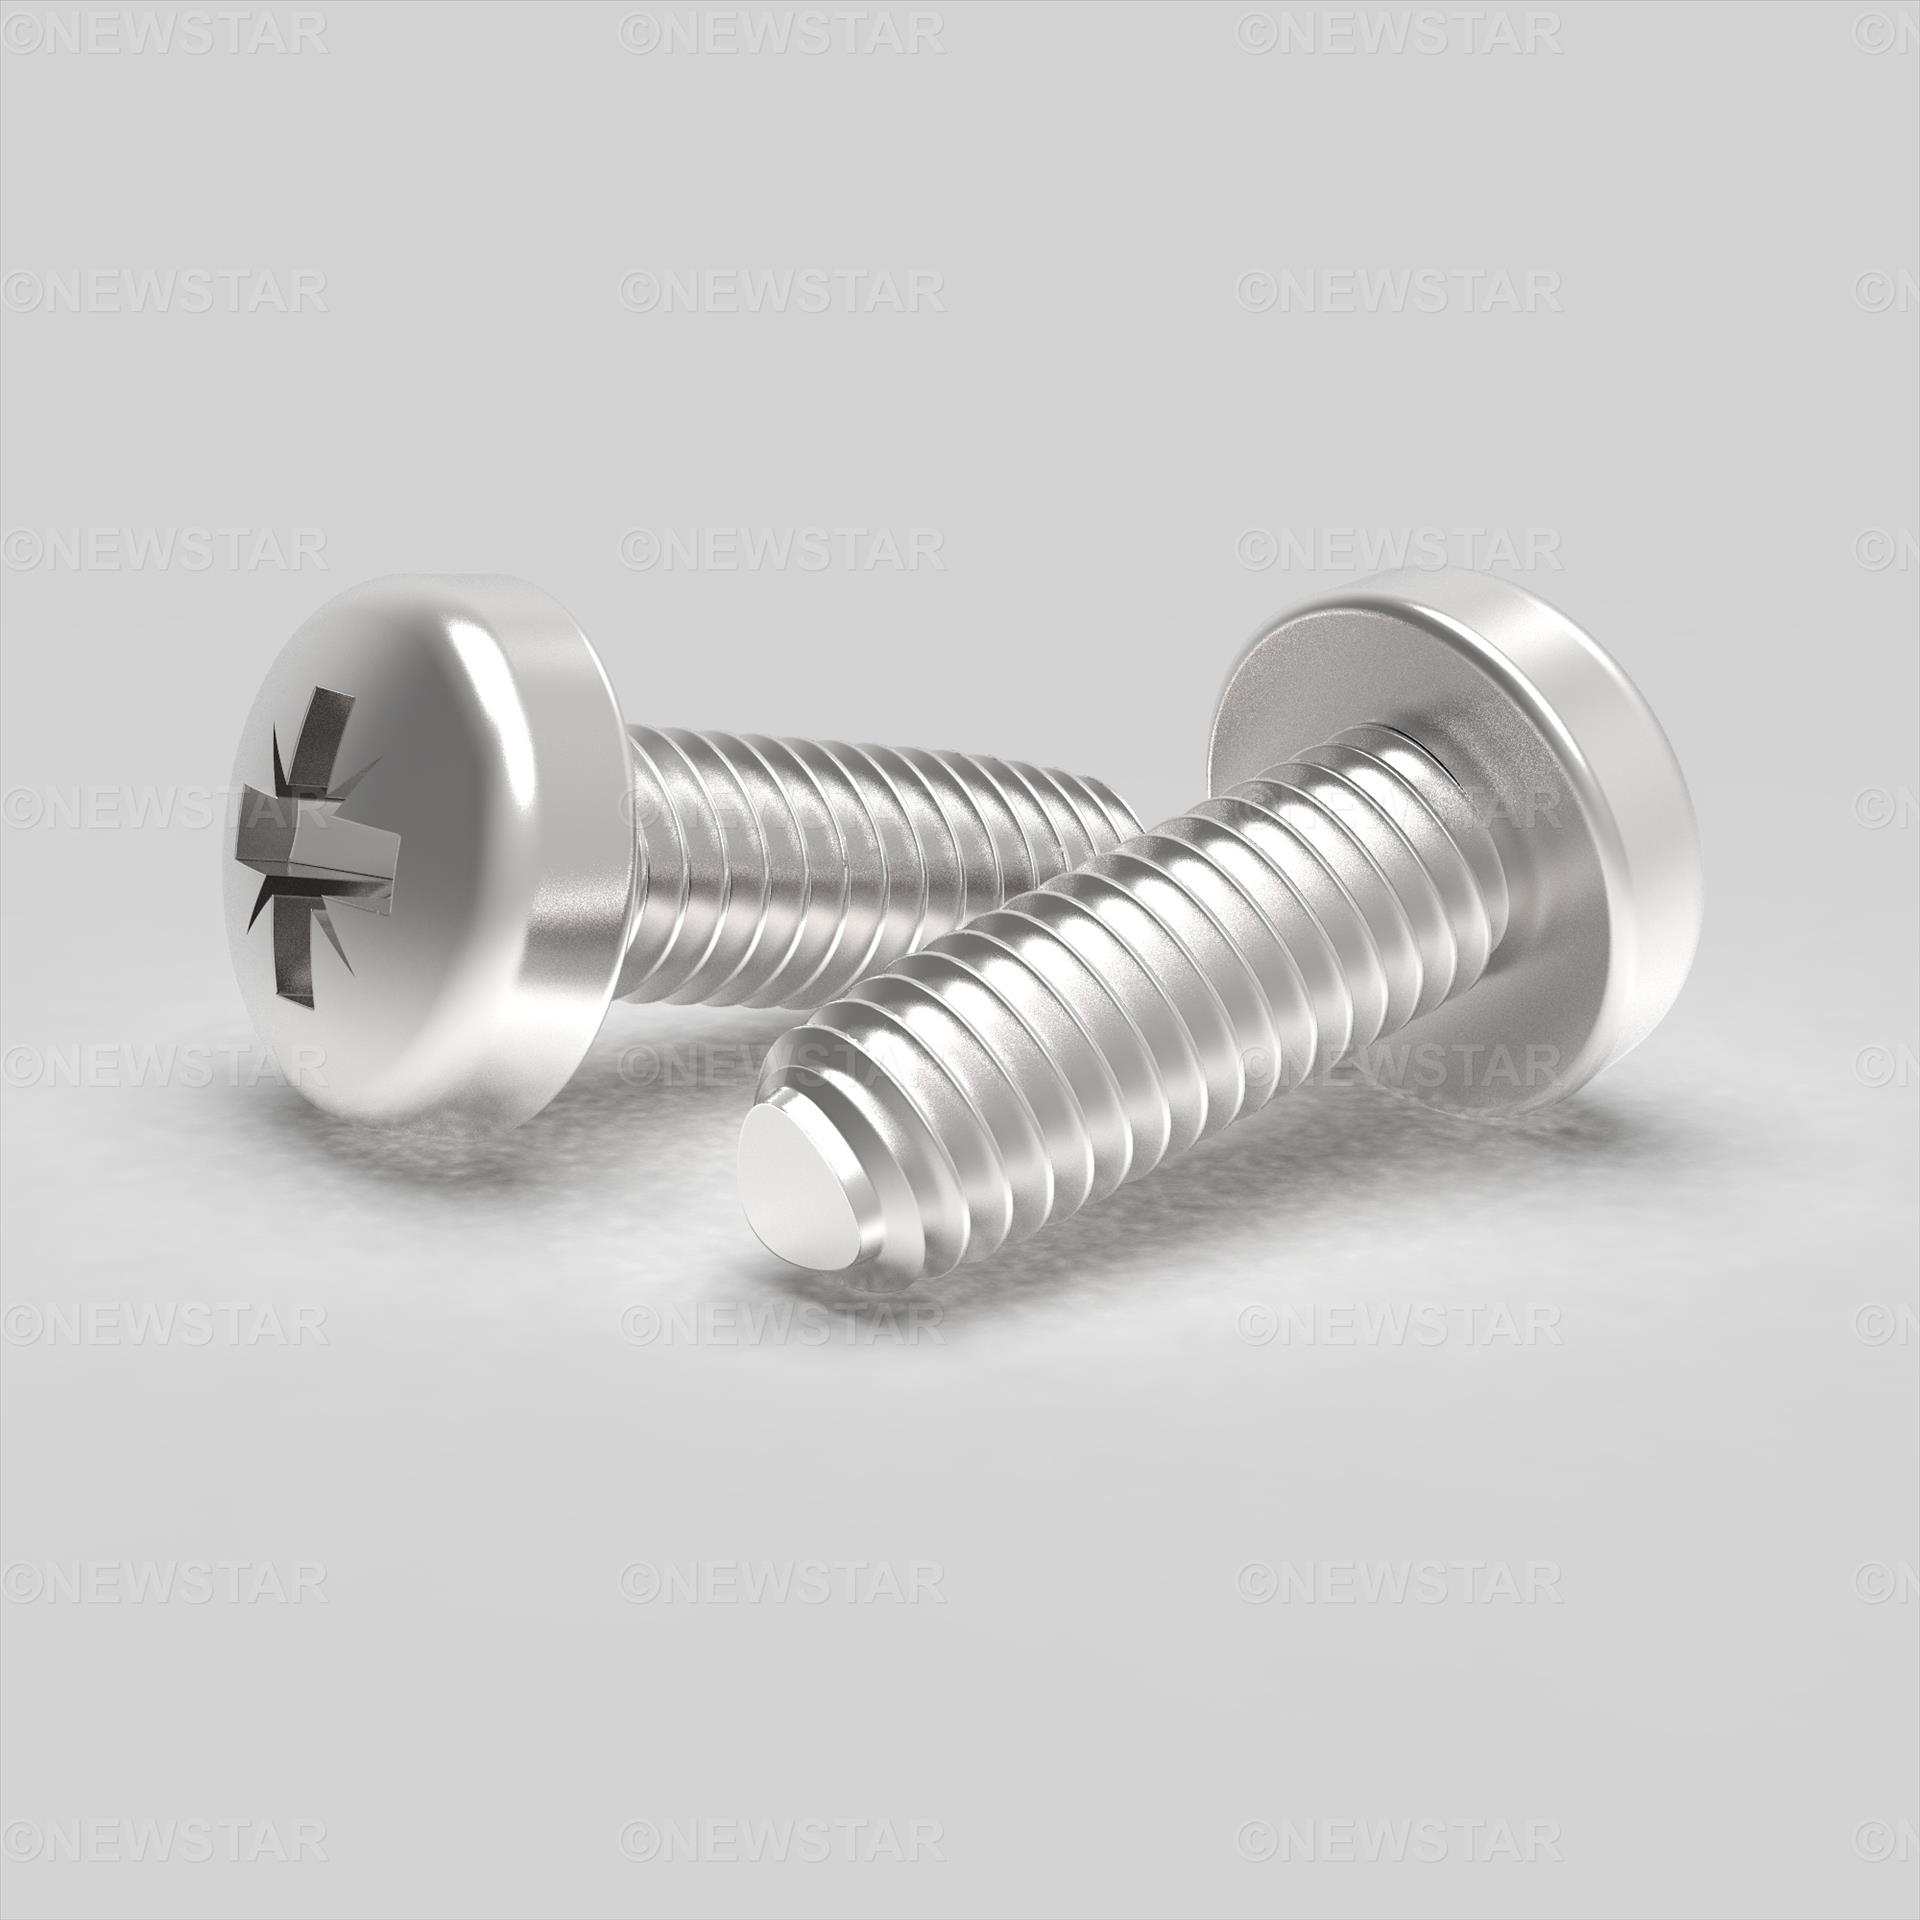 M2.5 X 5 Pan Pozi Thread Forming Screw DIN7500C A2 Stainless Steel